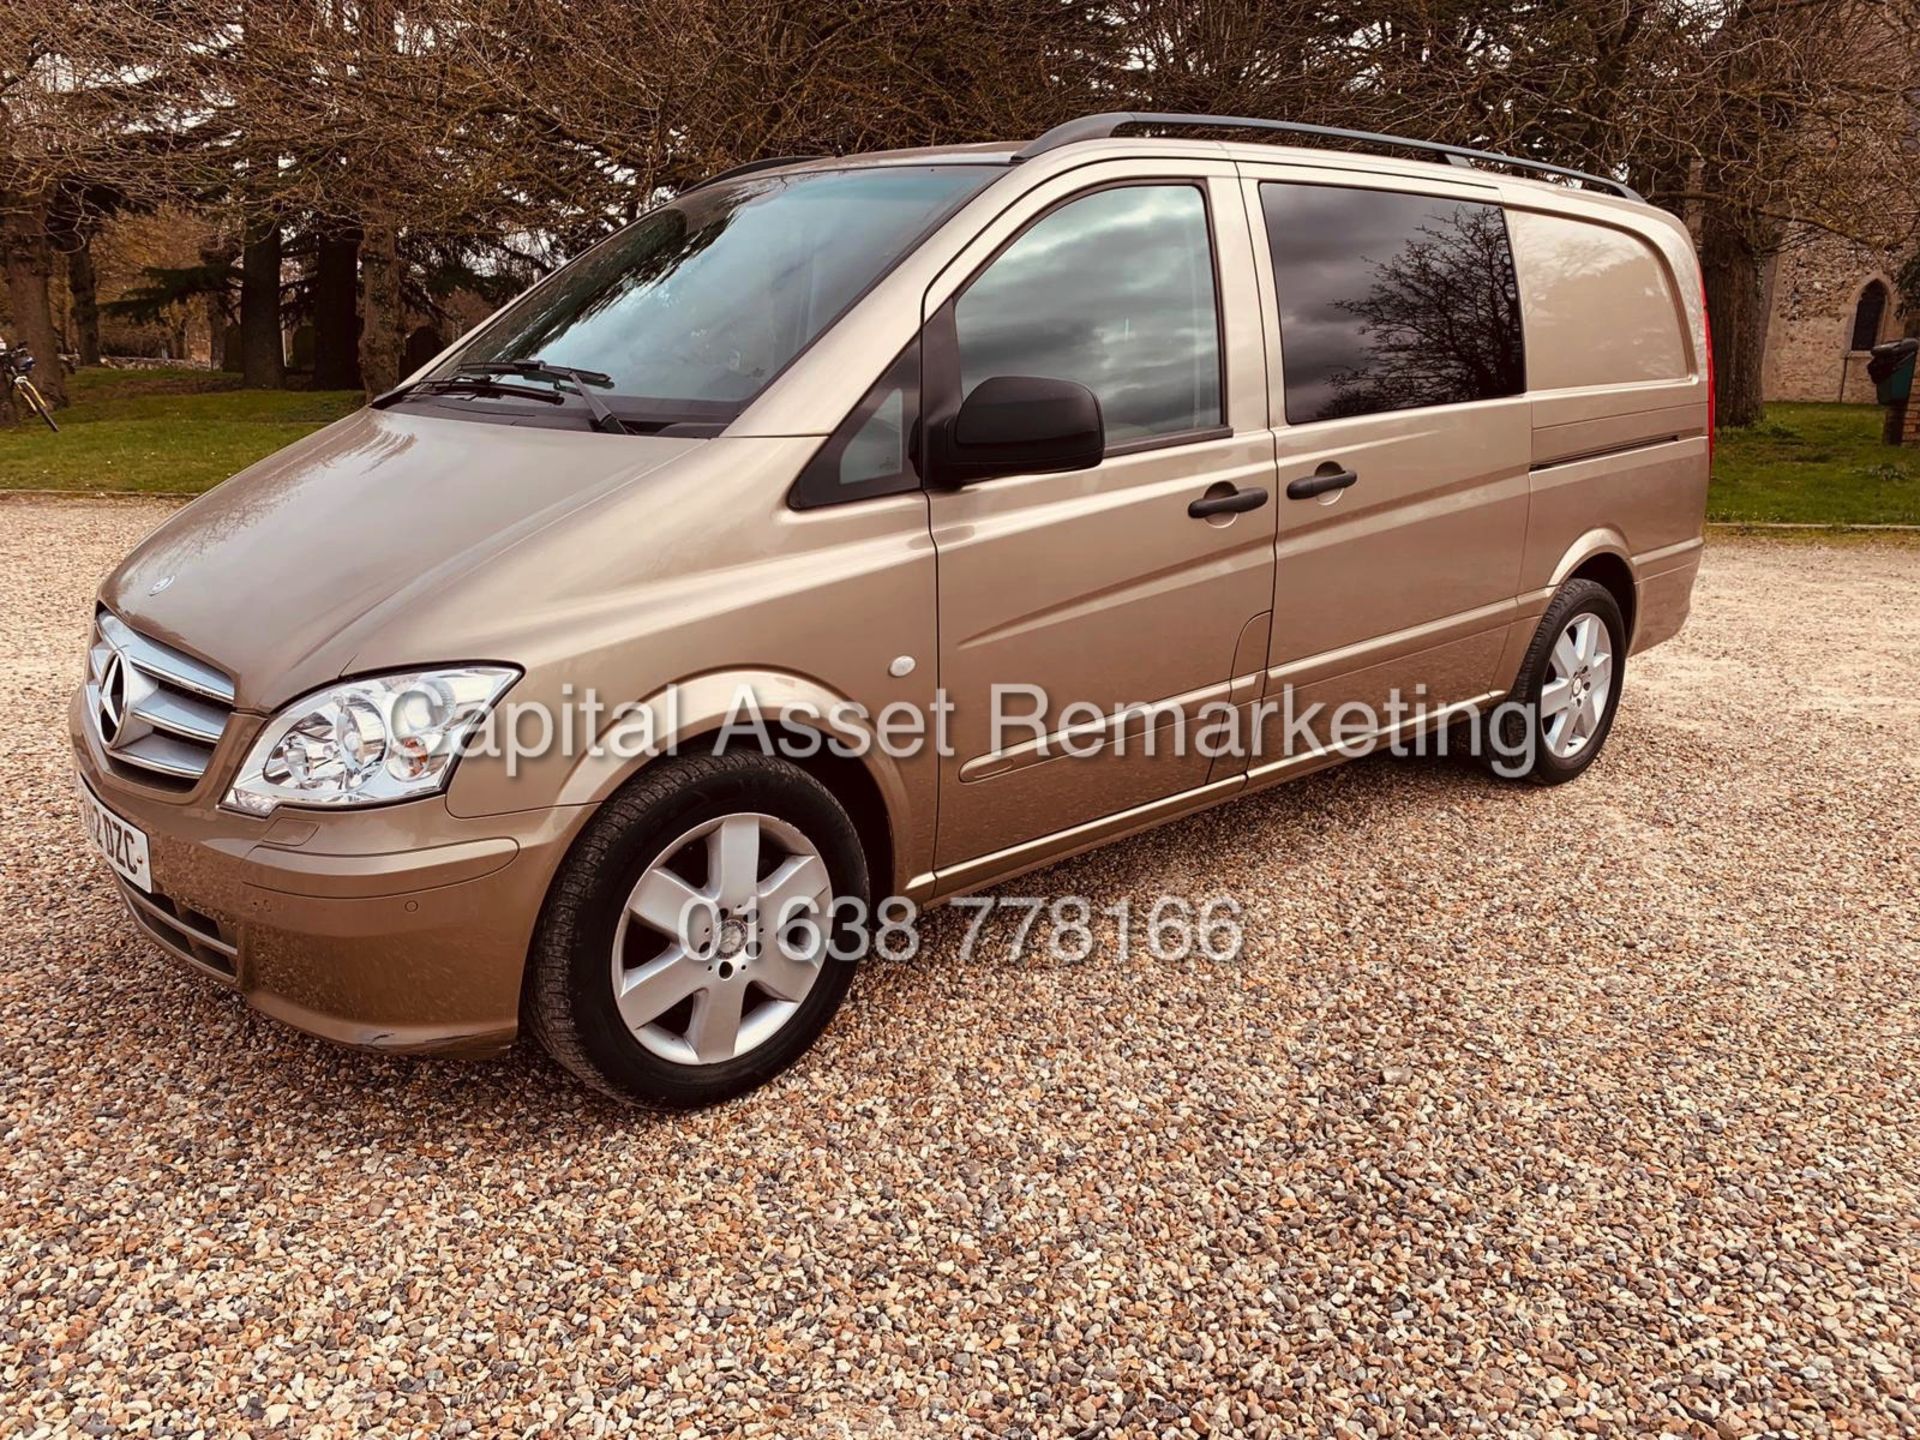 MERCEDES VITO 122CDI *SPORT-X SPEC* 8 SEATER DUALINER LWB (12 REG) 1 OWNER FSH -AIR CON-ALL THE TOYS